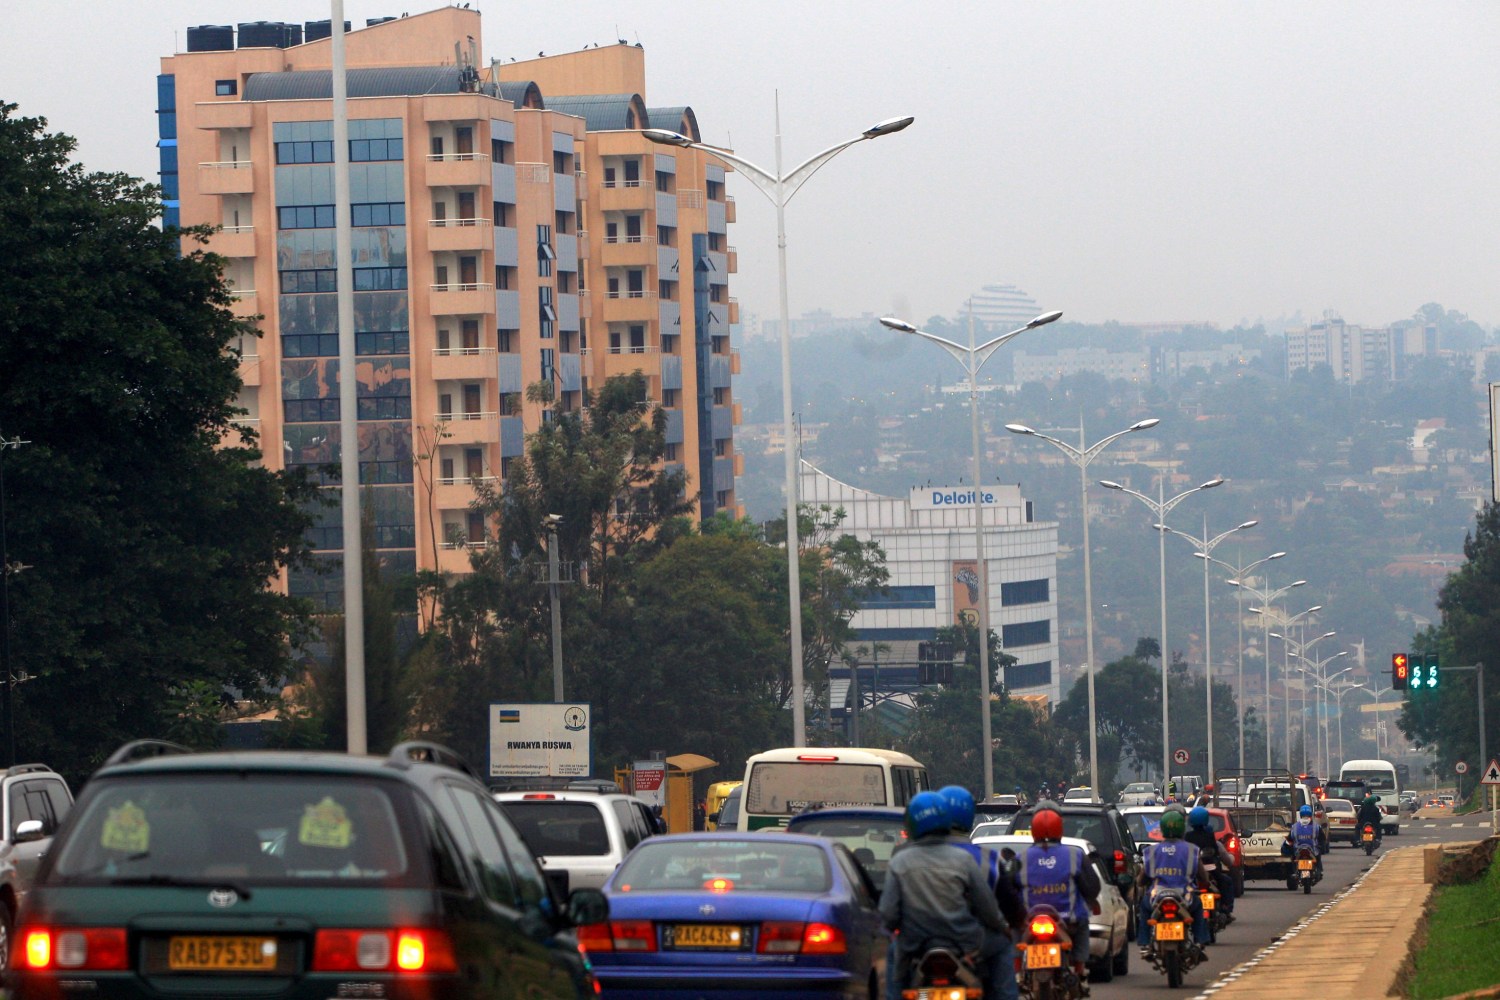 Traffic builds up on the main street on the eve of a referendum as Rwandans will vote to amend its Constitution to allow President Paul Kagame to seek a third term in Rwanda capital Kigali, December 17, 2015. REUTERS/James Akena - GF10000269470